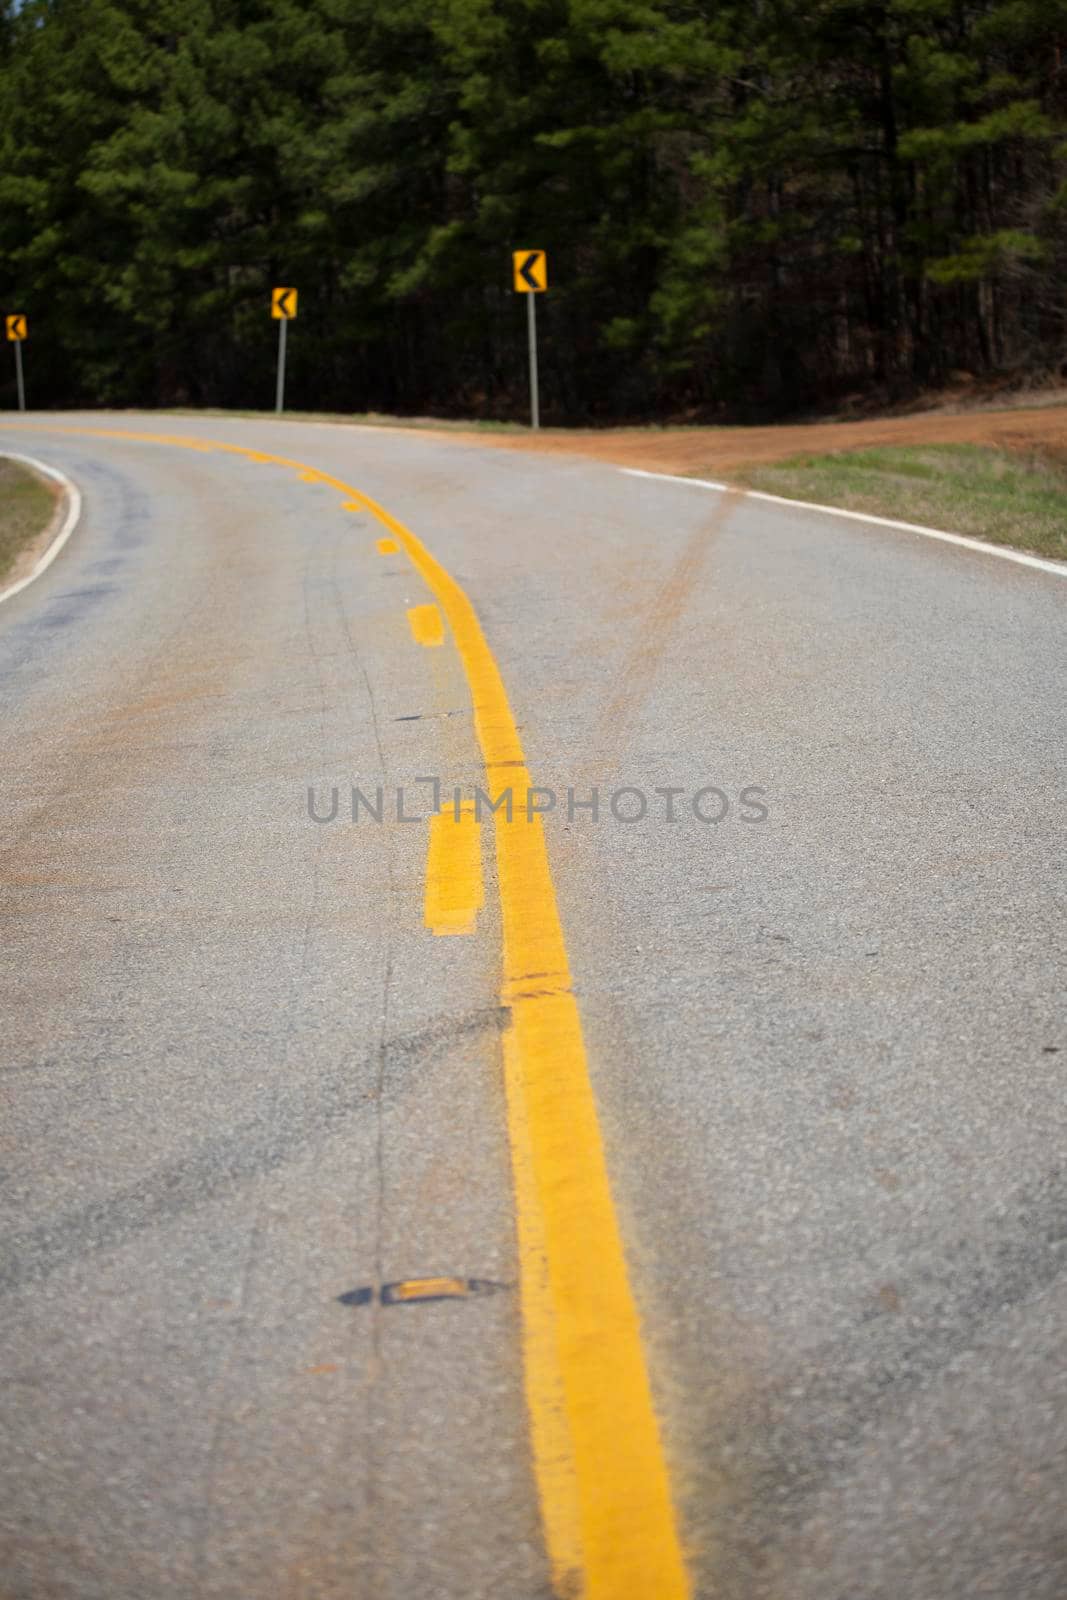 Highway that is about to curve and signs warning of the curve